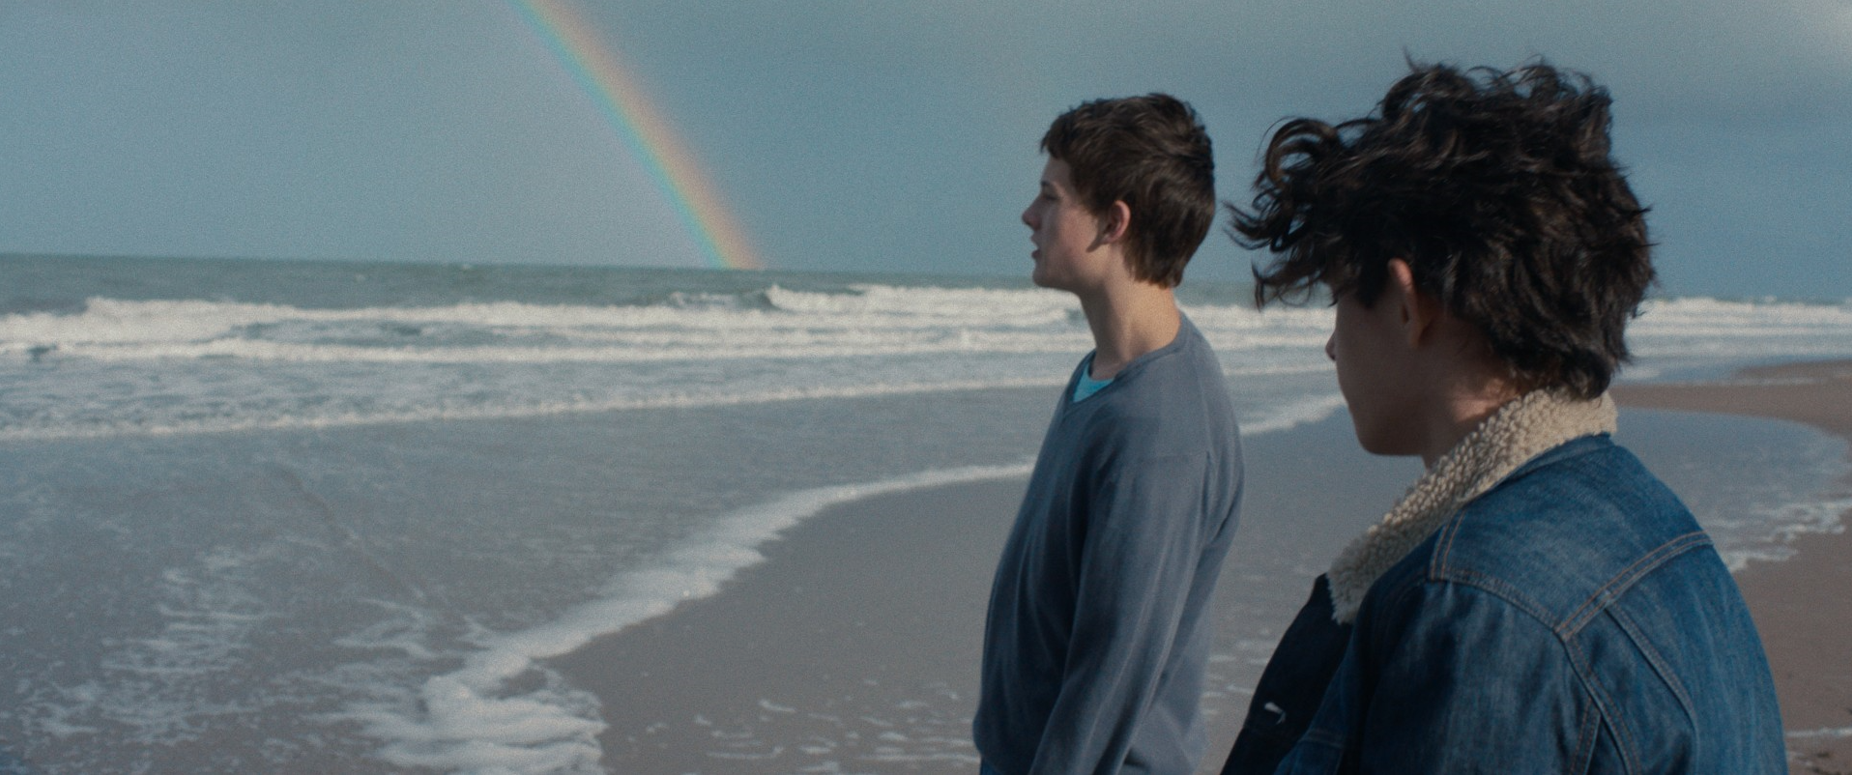 On a beach, two young people look at the sea.